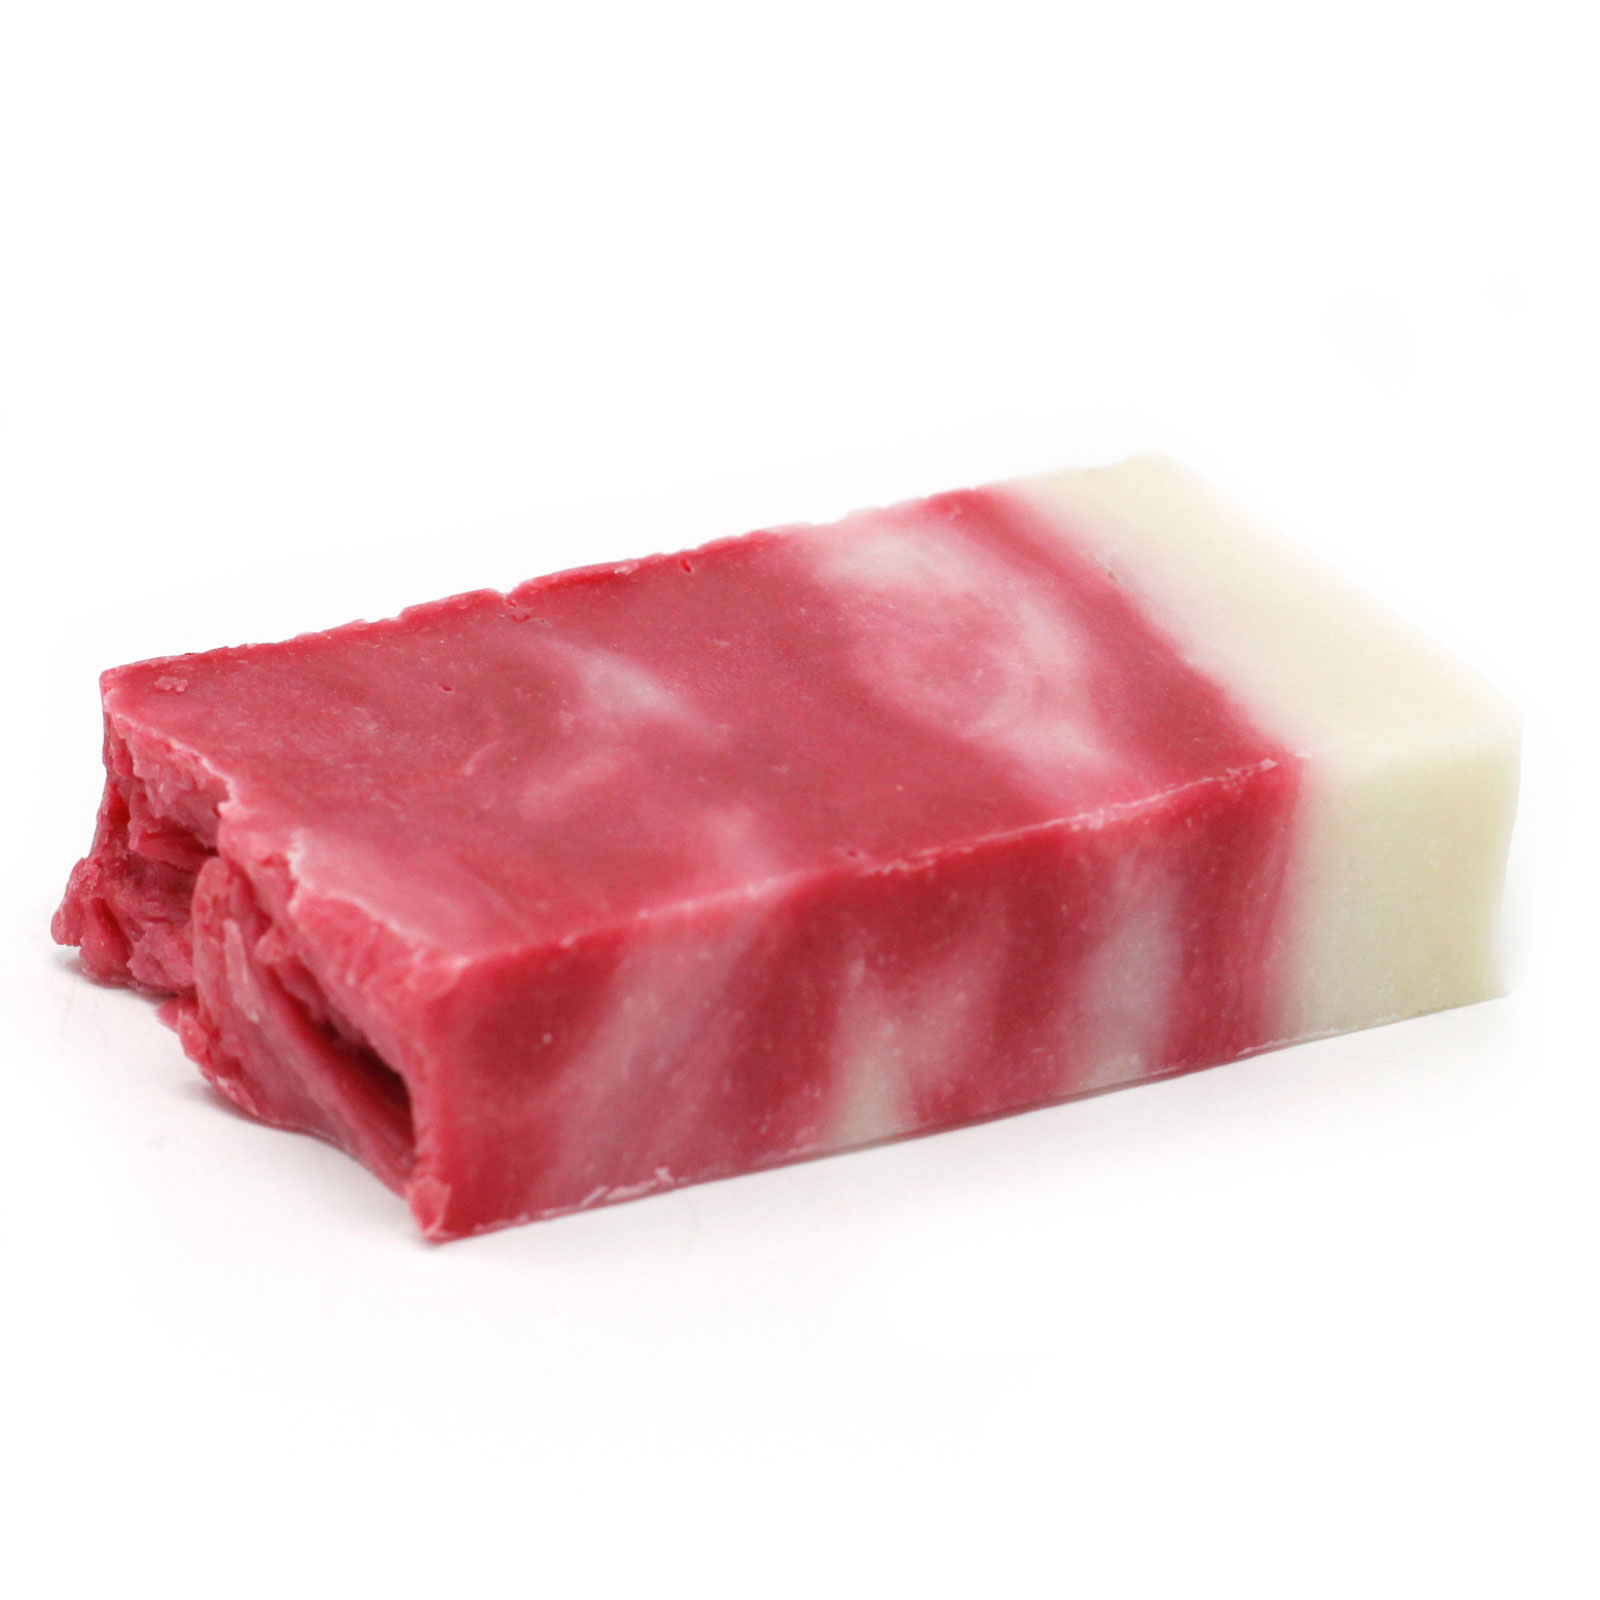 Rosehip - Olive Oil Soap - SLICE approx 100g